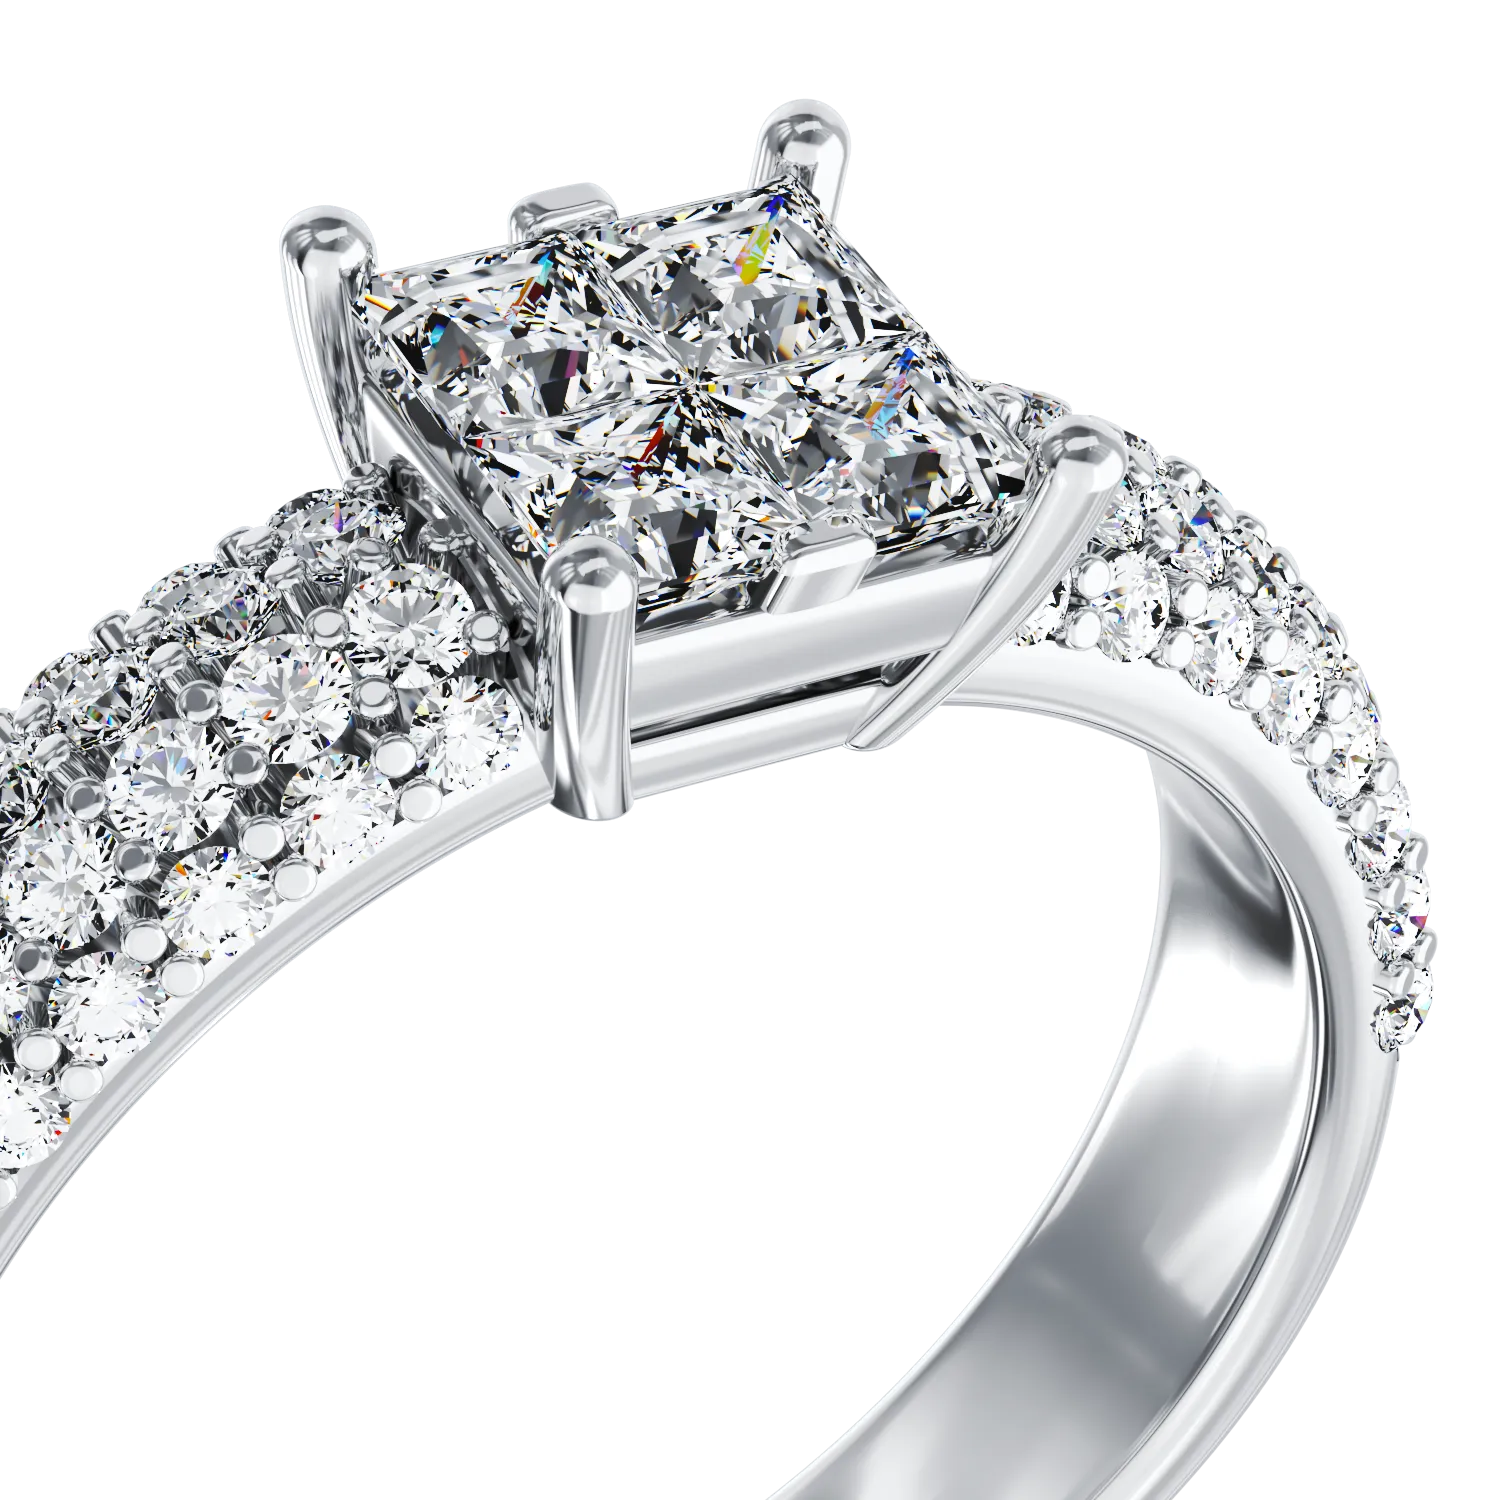 18K white gold engagement ring with 0.98ct diamonds